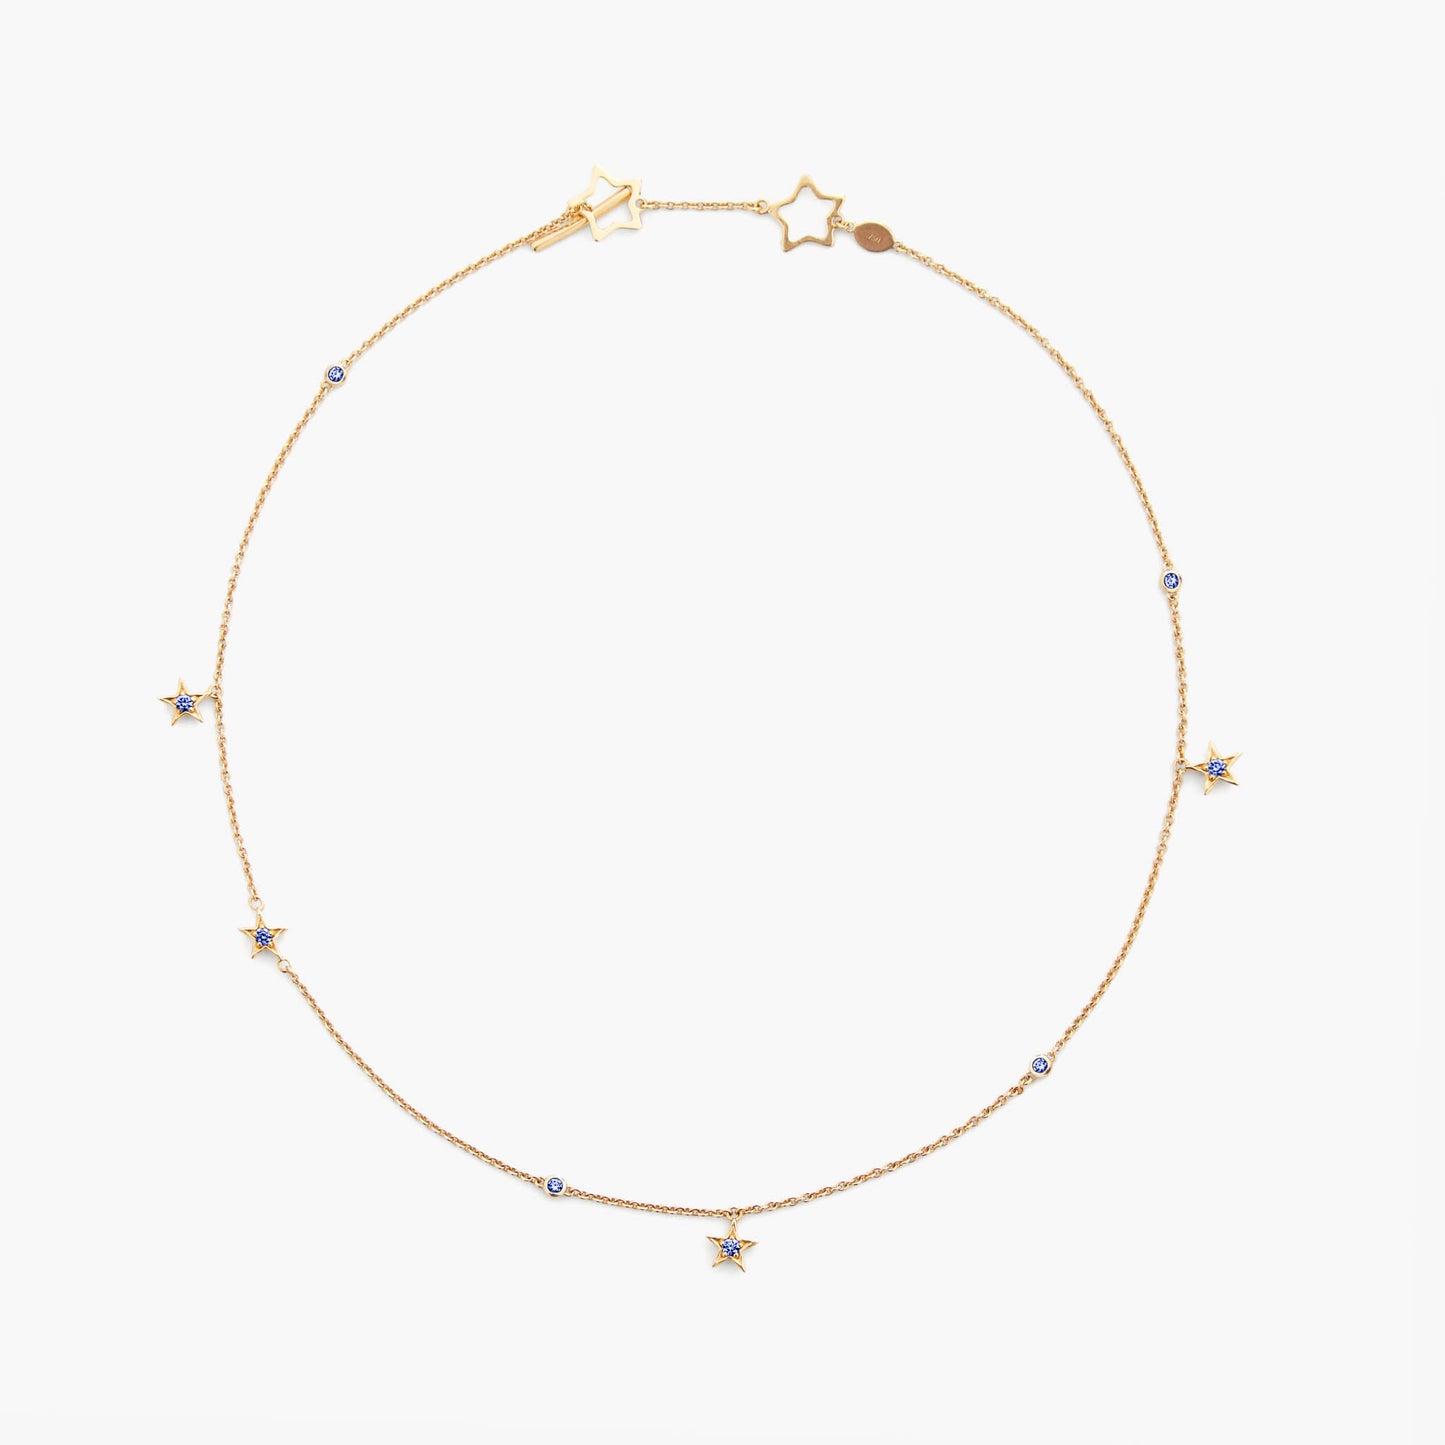 Guiding Star 18ct Yellow Gold & Sapphire Necklace, 40cm